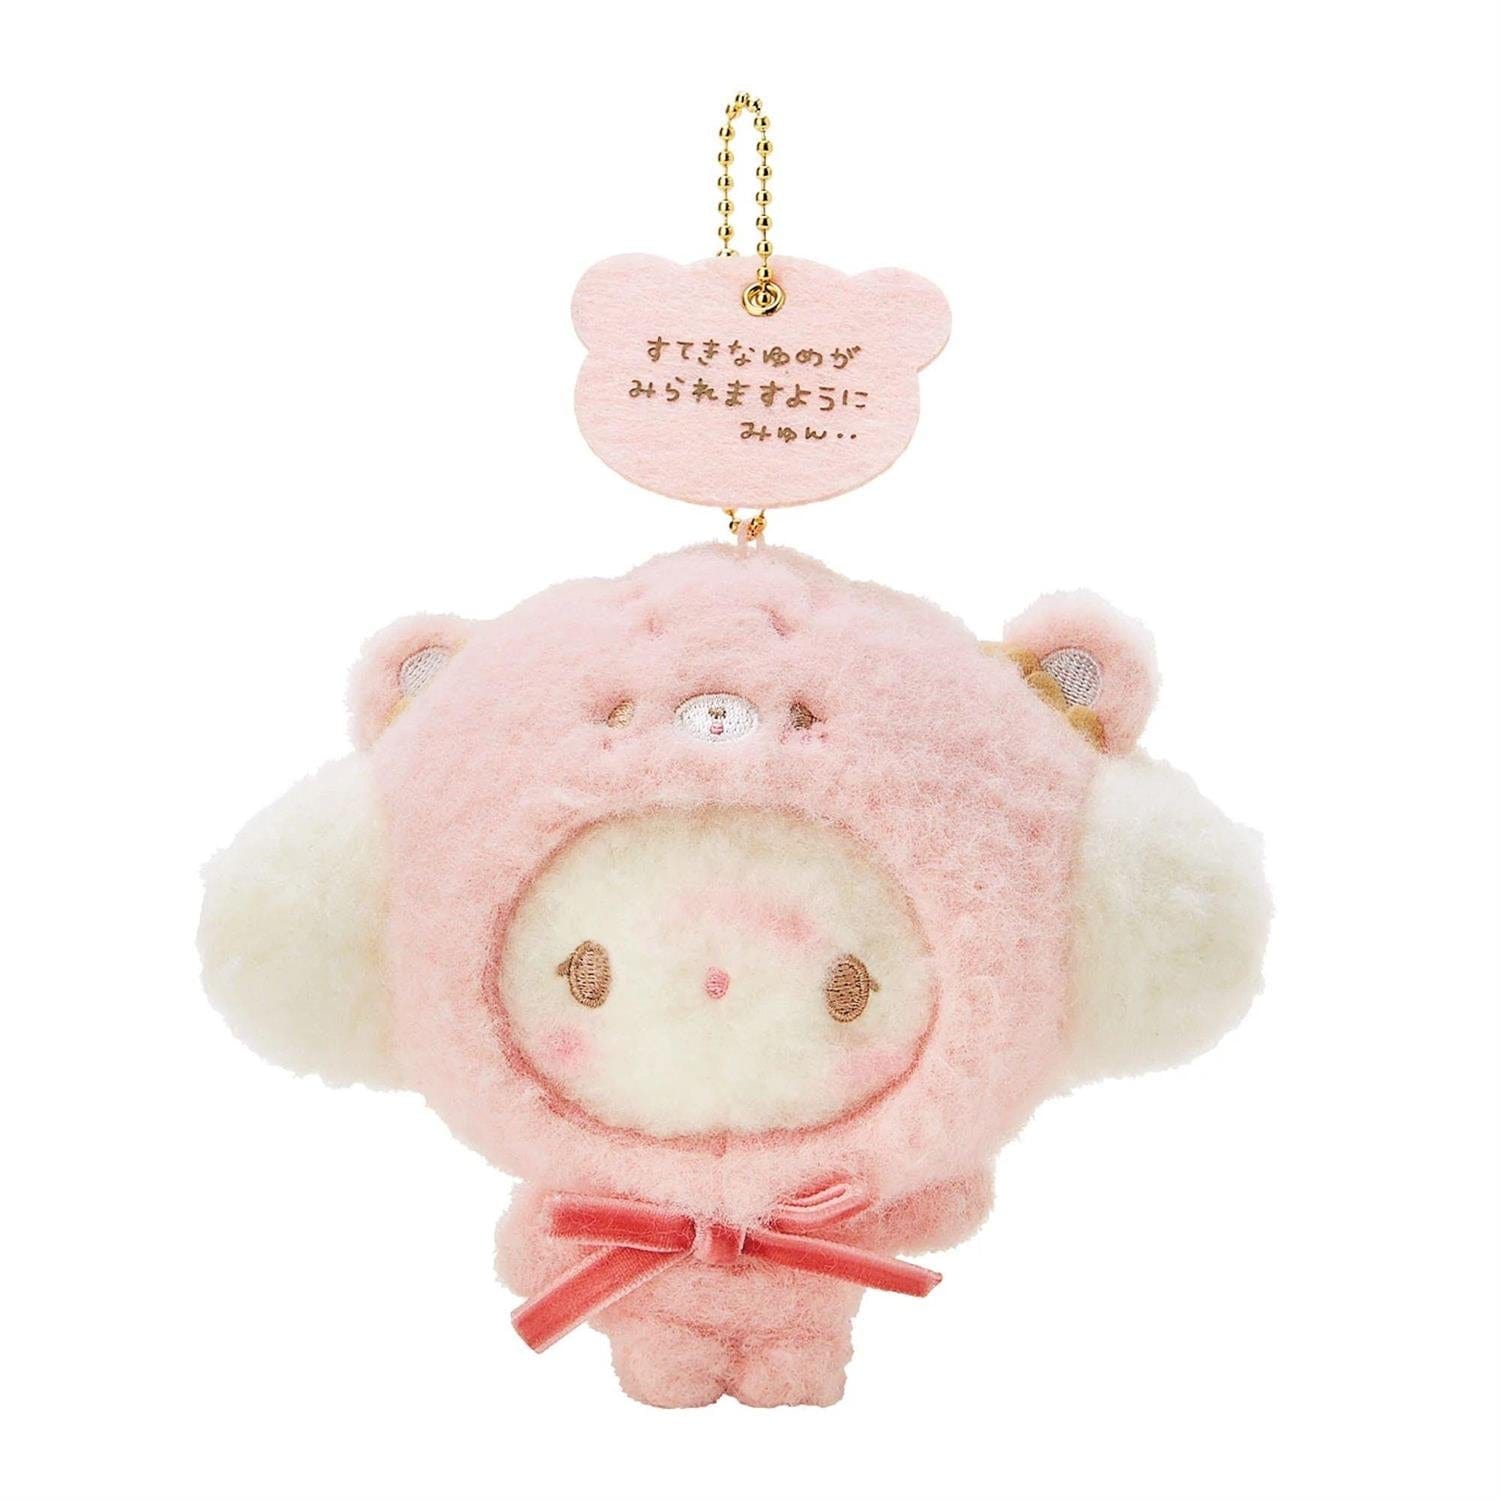 Cogimyun in Bear Outfit Mascot Keychain